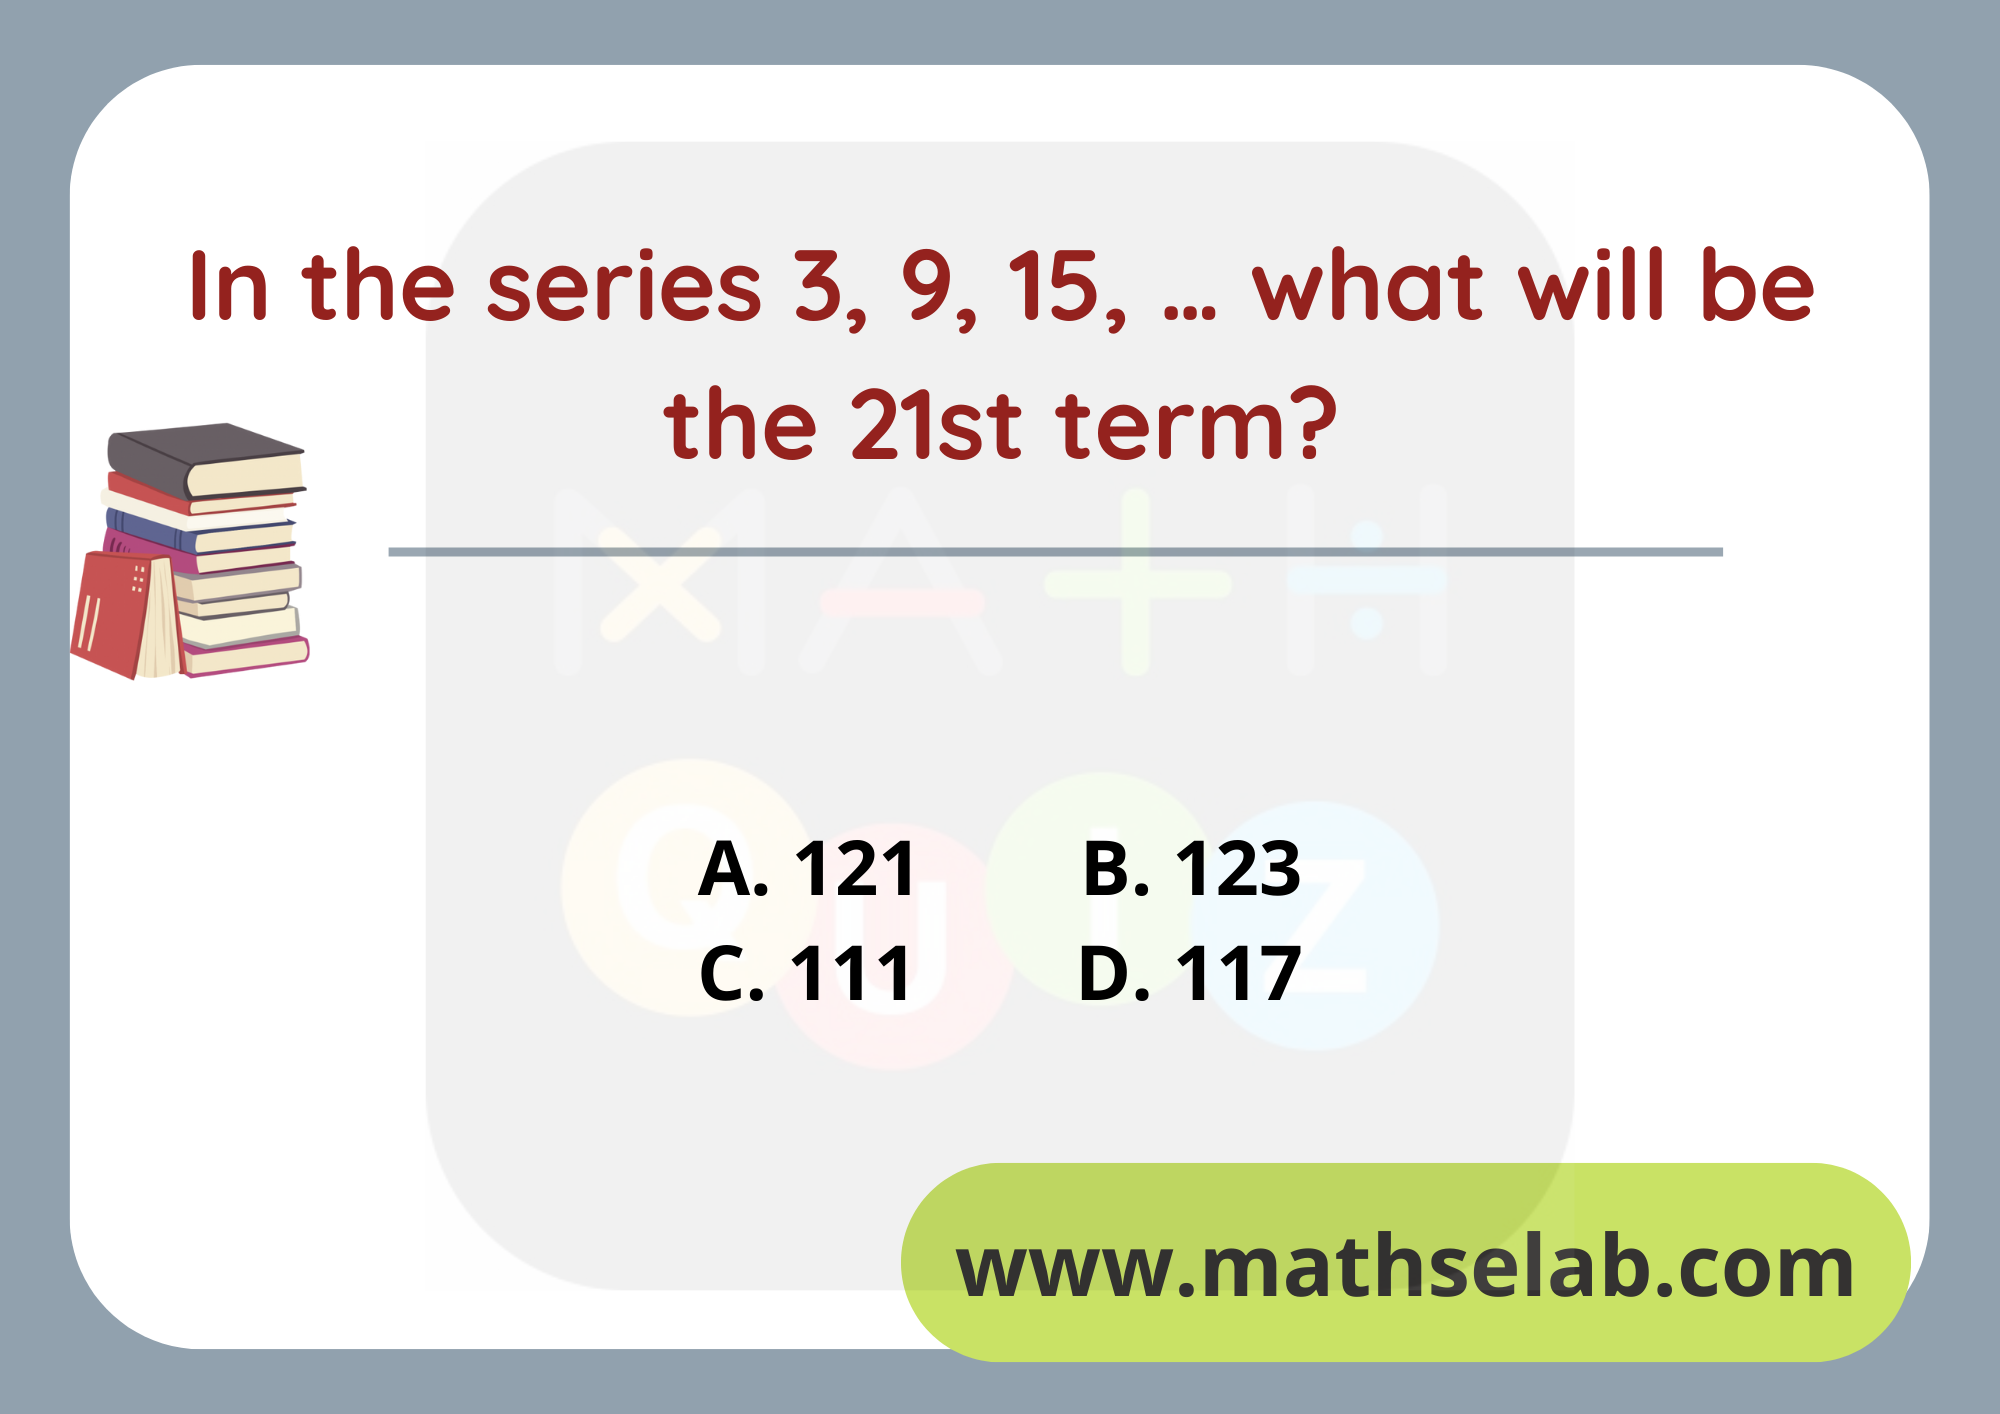 In the series 3, 9, 15, … what will be the 21st term - www.mathselab.com